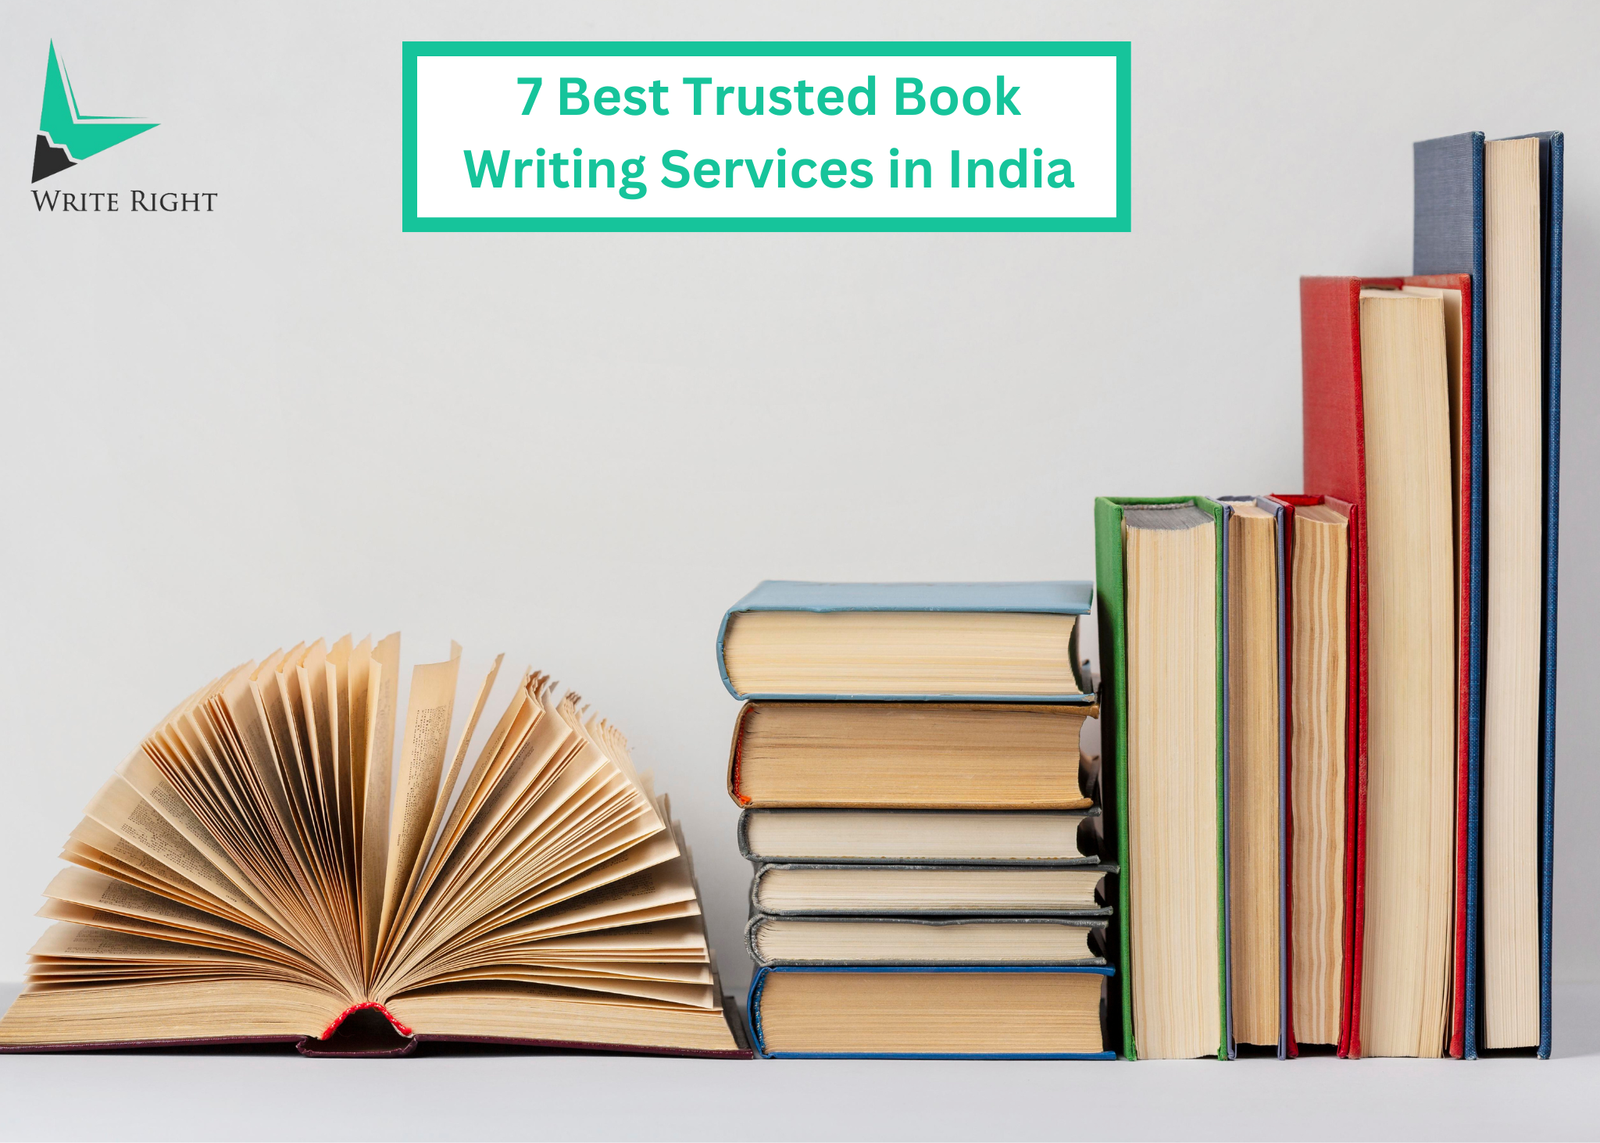 7 Best Trusted Book Writing Services in India